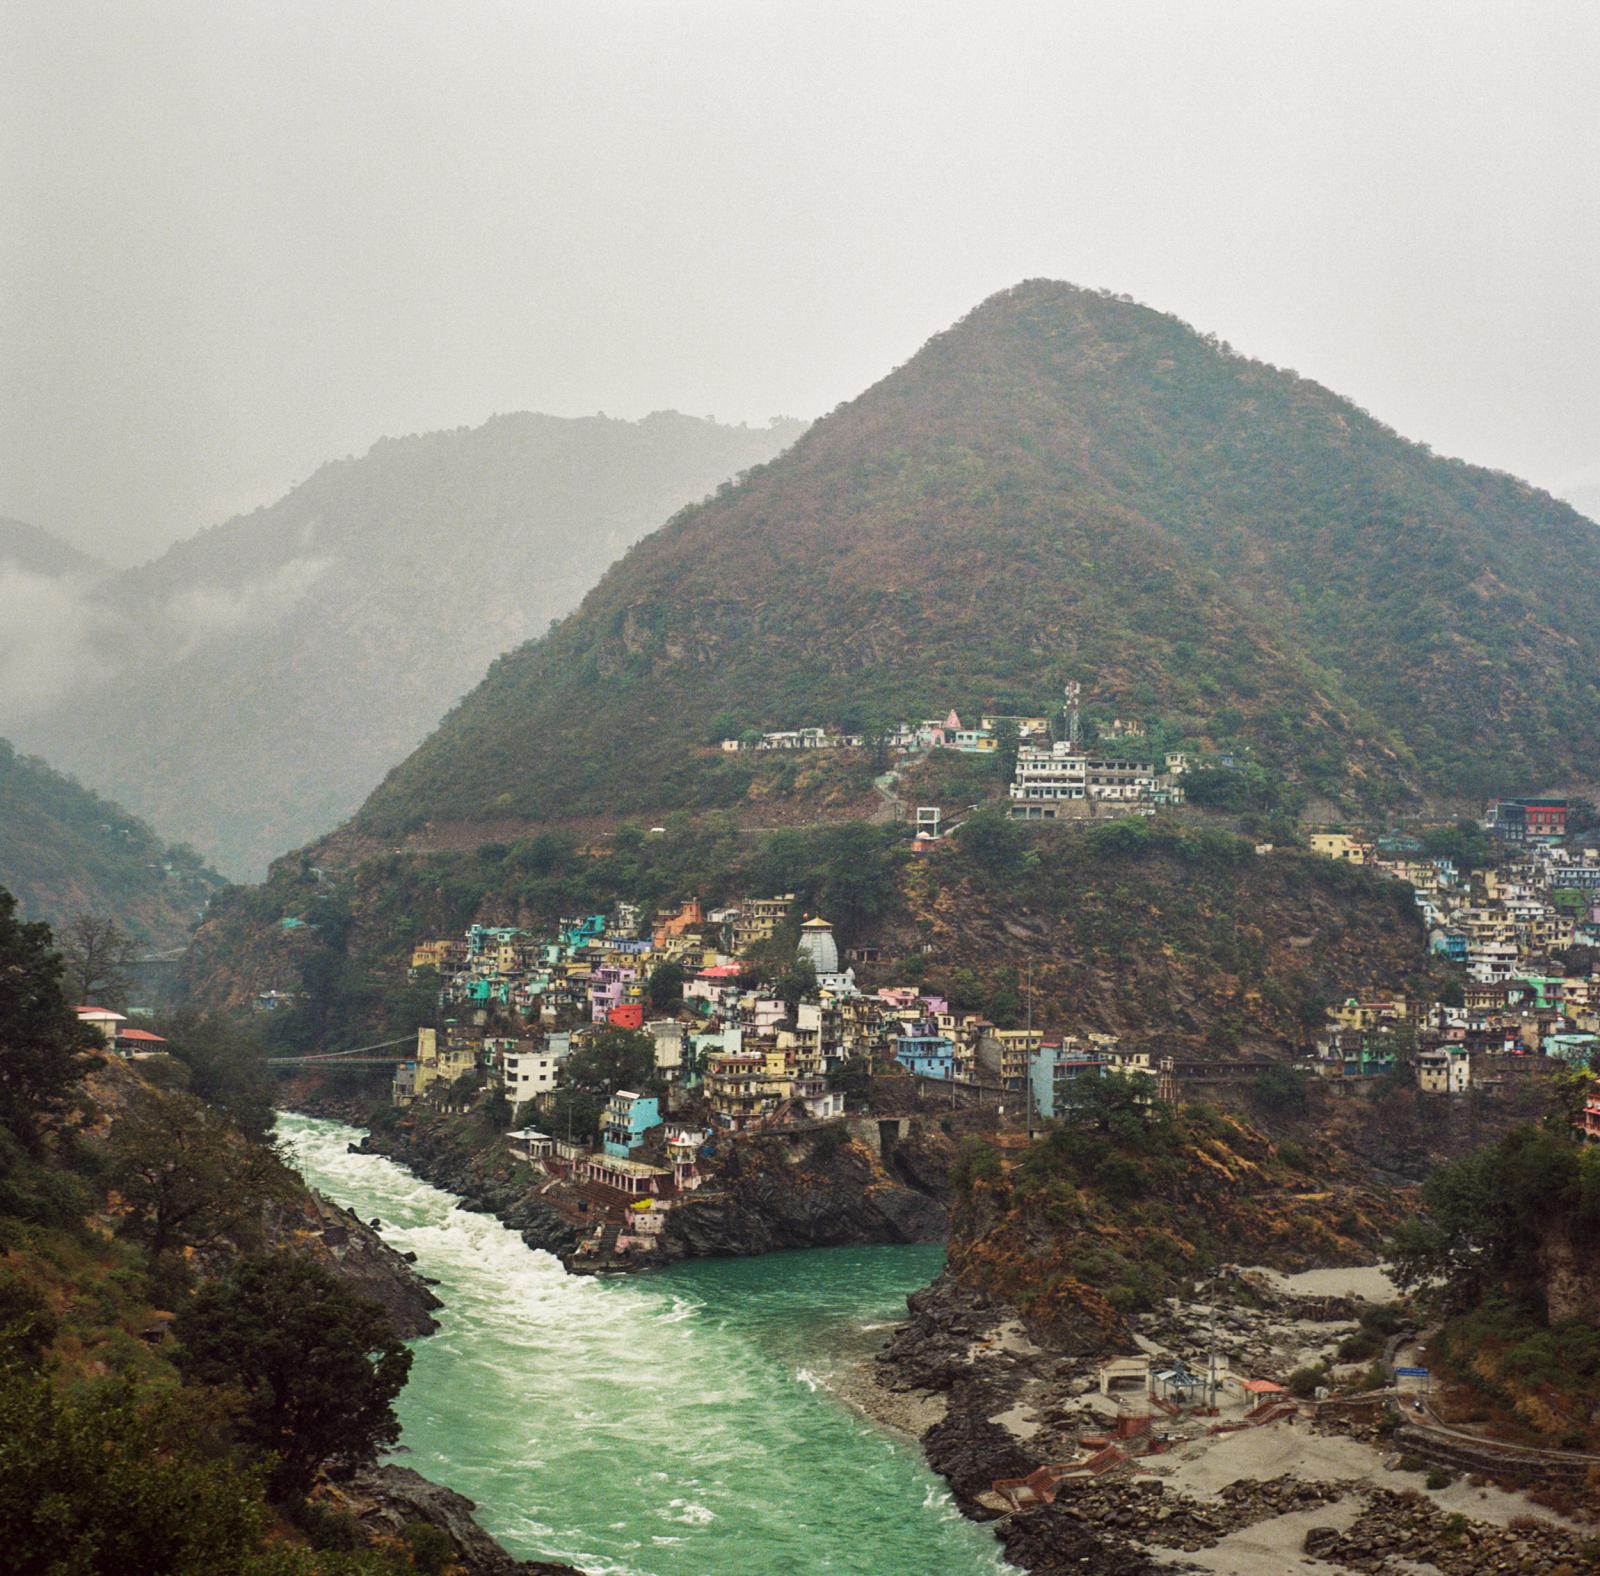 Saving India's Holiest River? - Two rivers, the Bhagirathi and the Alaknanda, converge in...